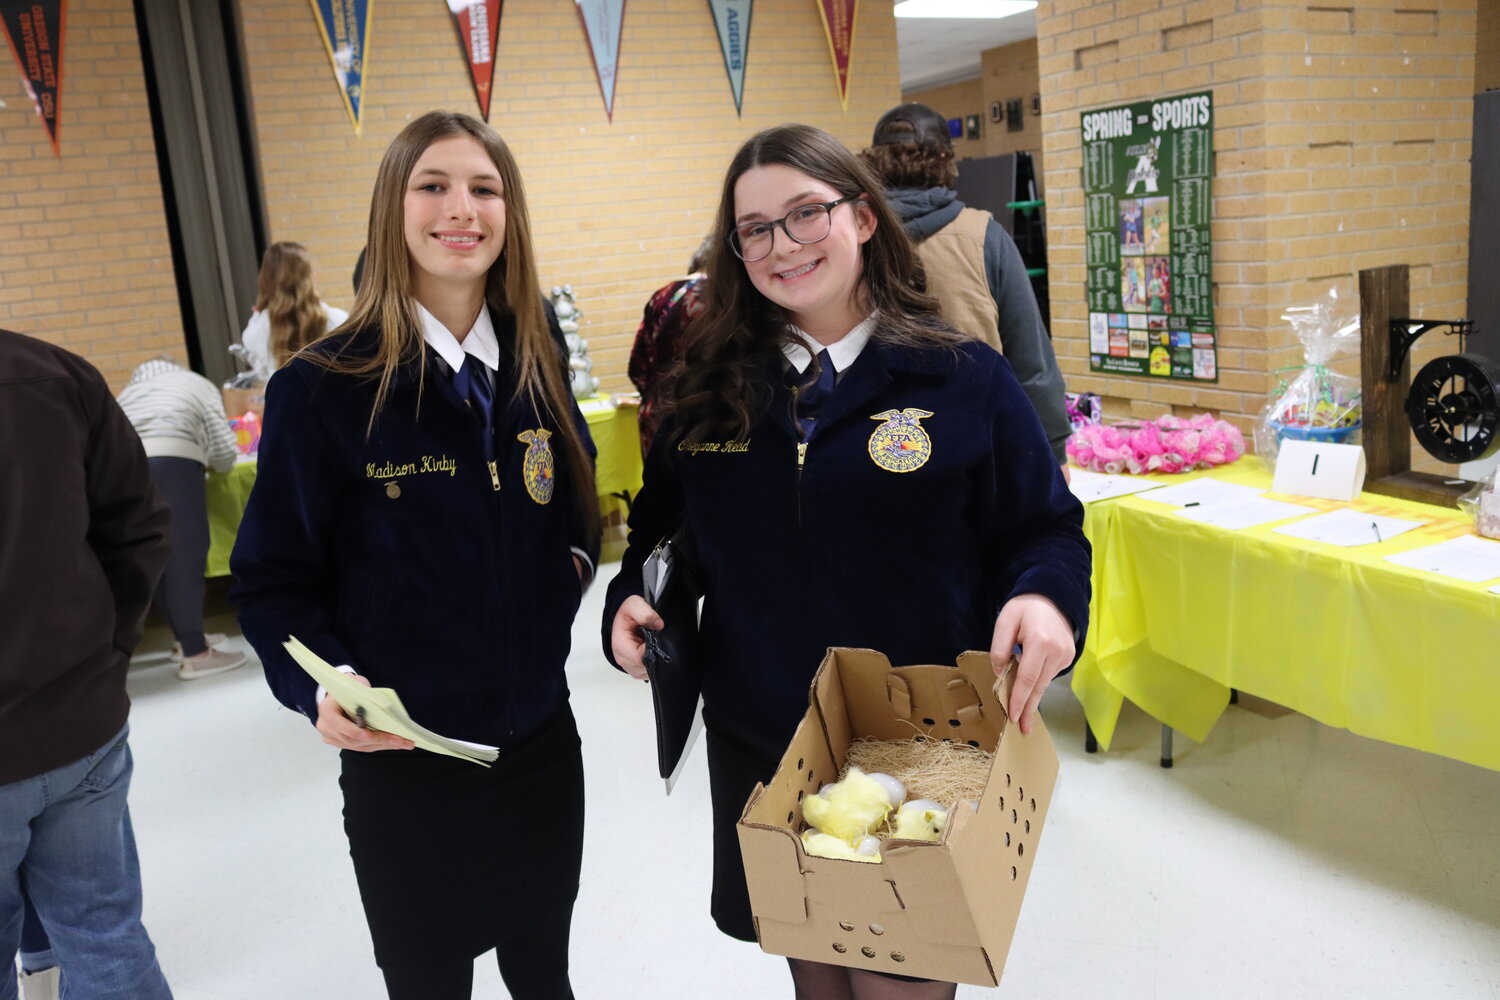 Cheyanne Redd, junior, and Madison Kirby, sophomore, sell plastic eggs containing numbers that gave buyers the chance to win gift cards.